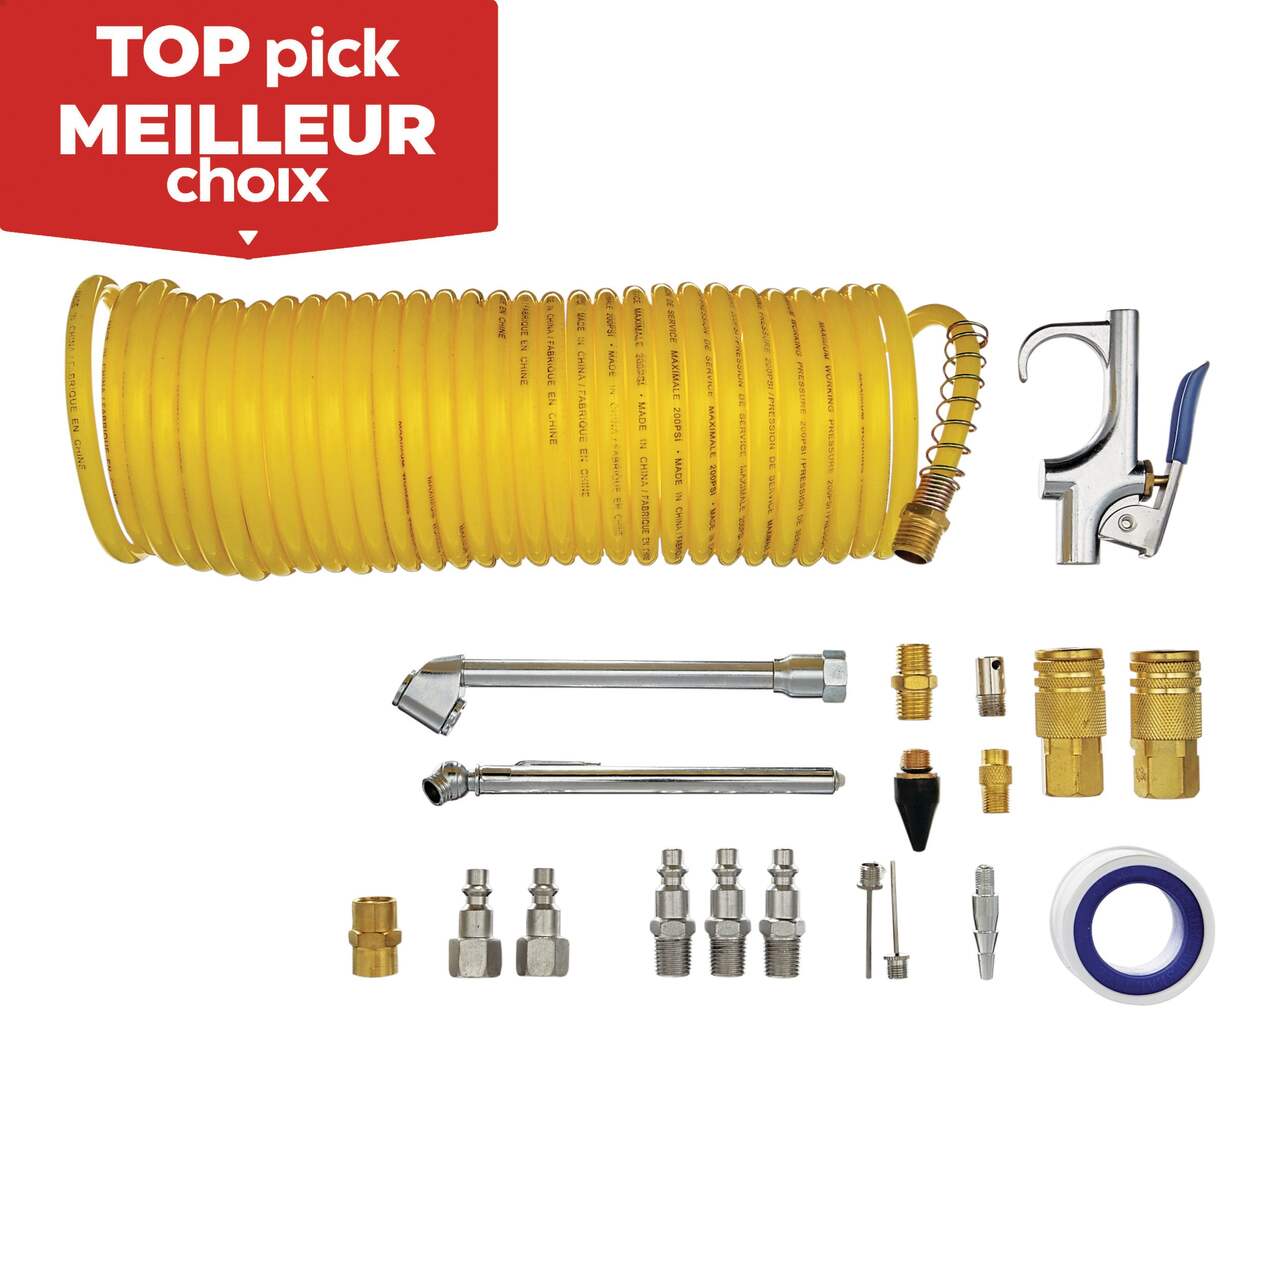 https://media-www.canadiantire.ca/product/fixing/tools/air-tools-accessories/0587797/mastercraft-20pc-compressor-starter-kit-with-hose-f1f99be4-aadb-4cca-ab01-f09a1035b4e7-jpgrendition.jpg?imdensity=1&imwidth=640&impolicy=mZoom